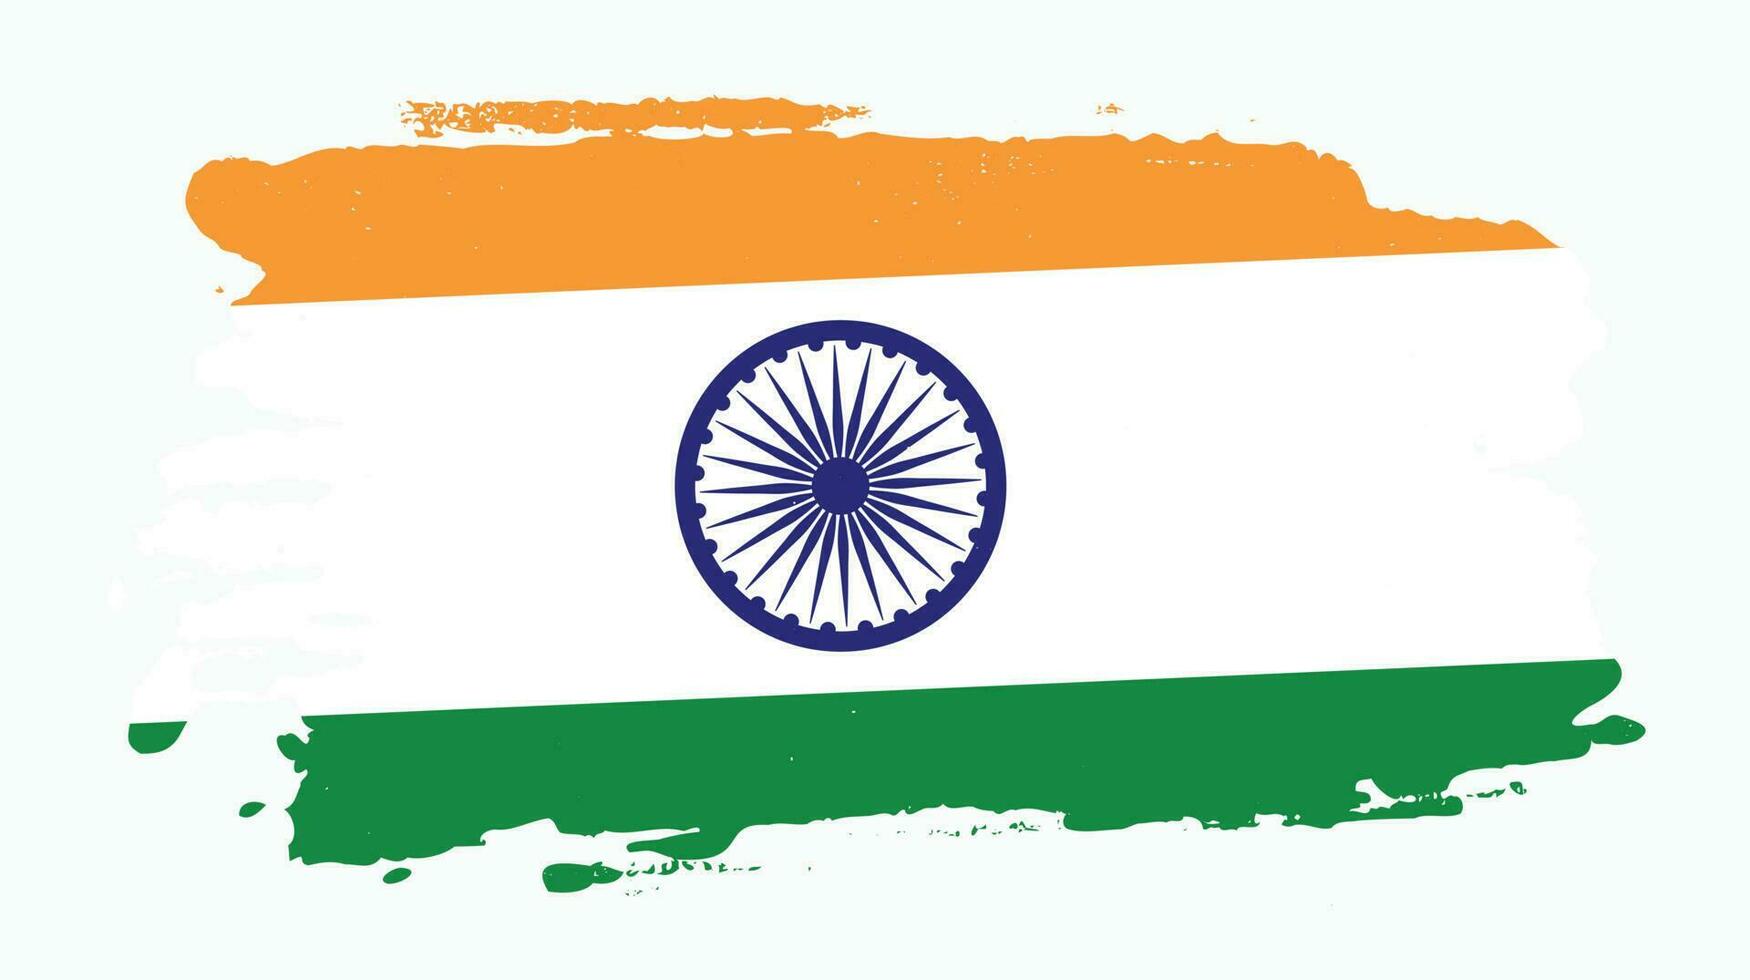 Faded grungy style India flag vector